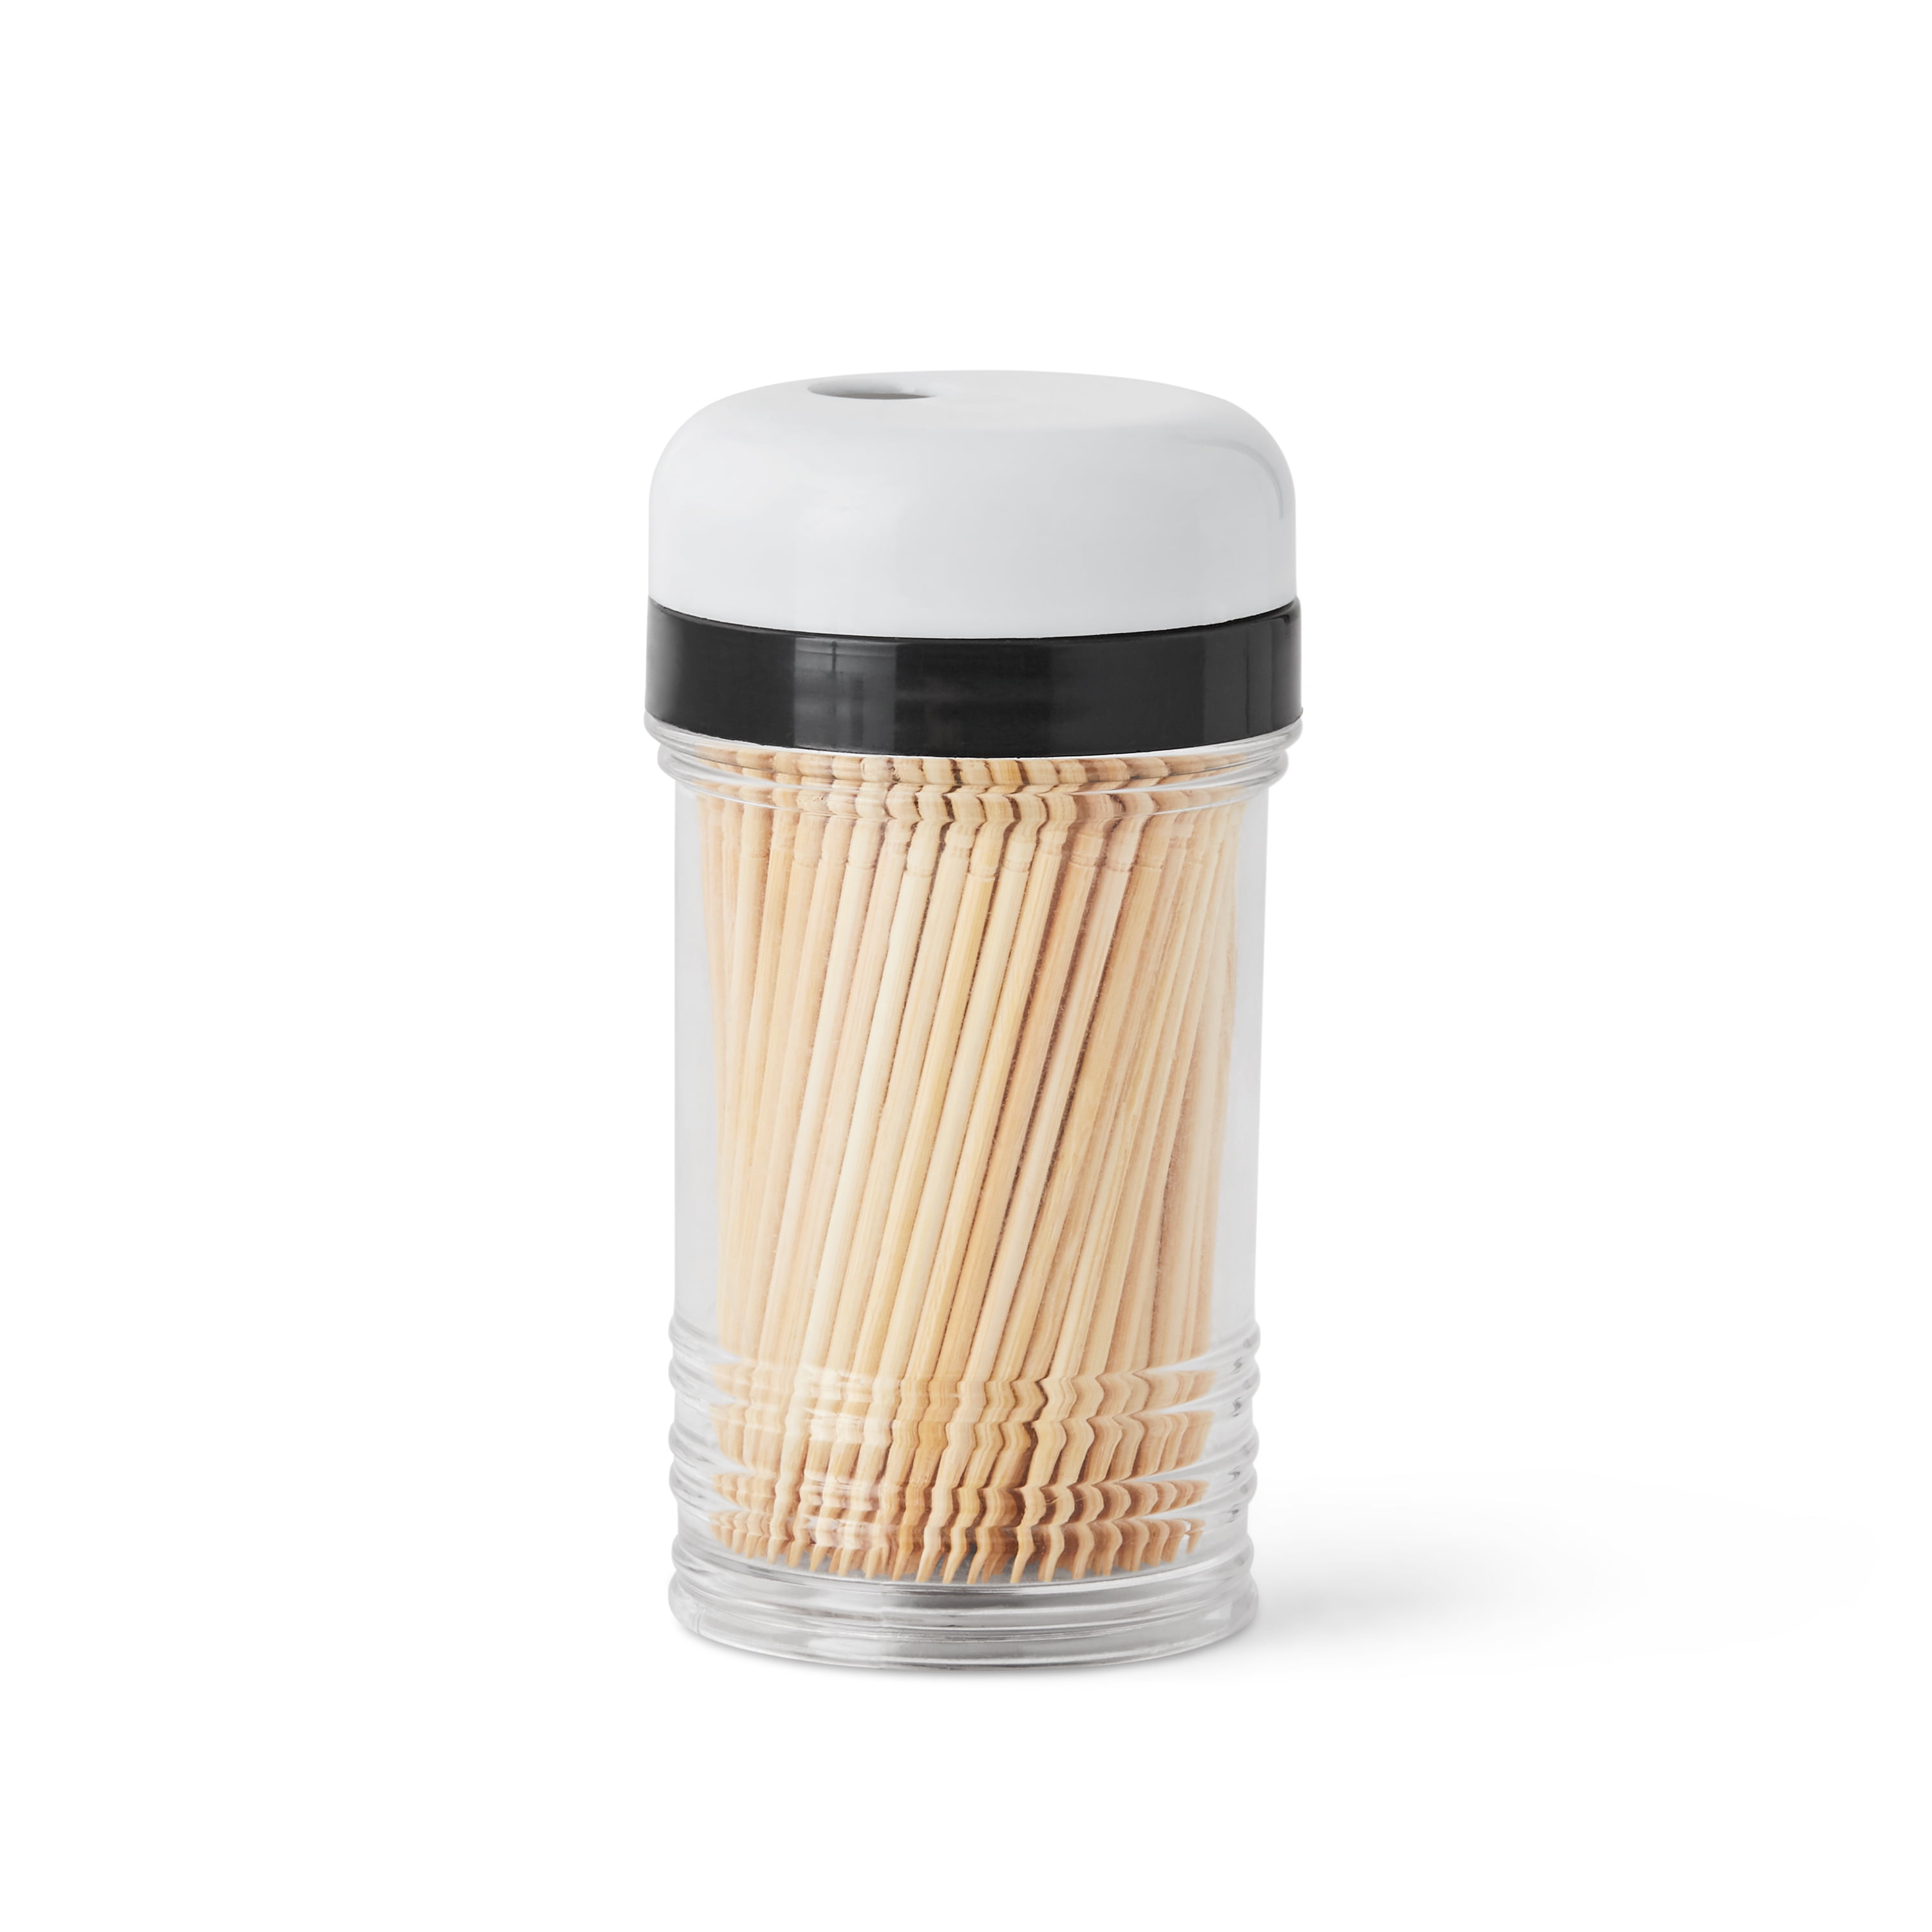 1 Pc Plastic Toothpick Holder with Bamboo Cover Toothpick Dispenser Kitchen Home Dining Gadget